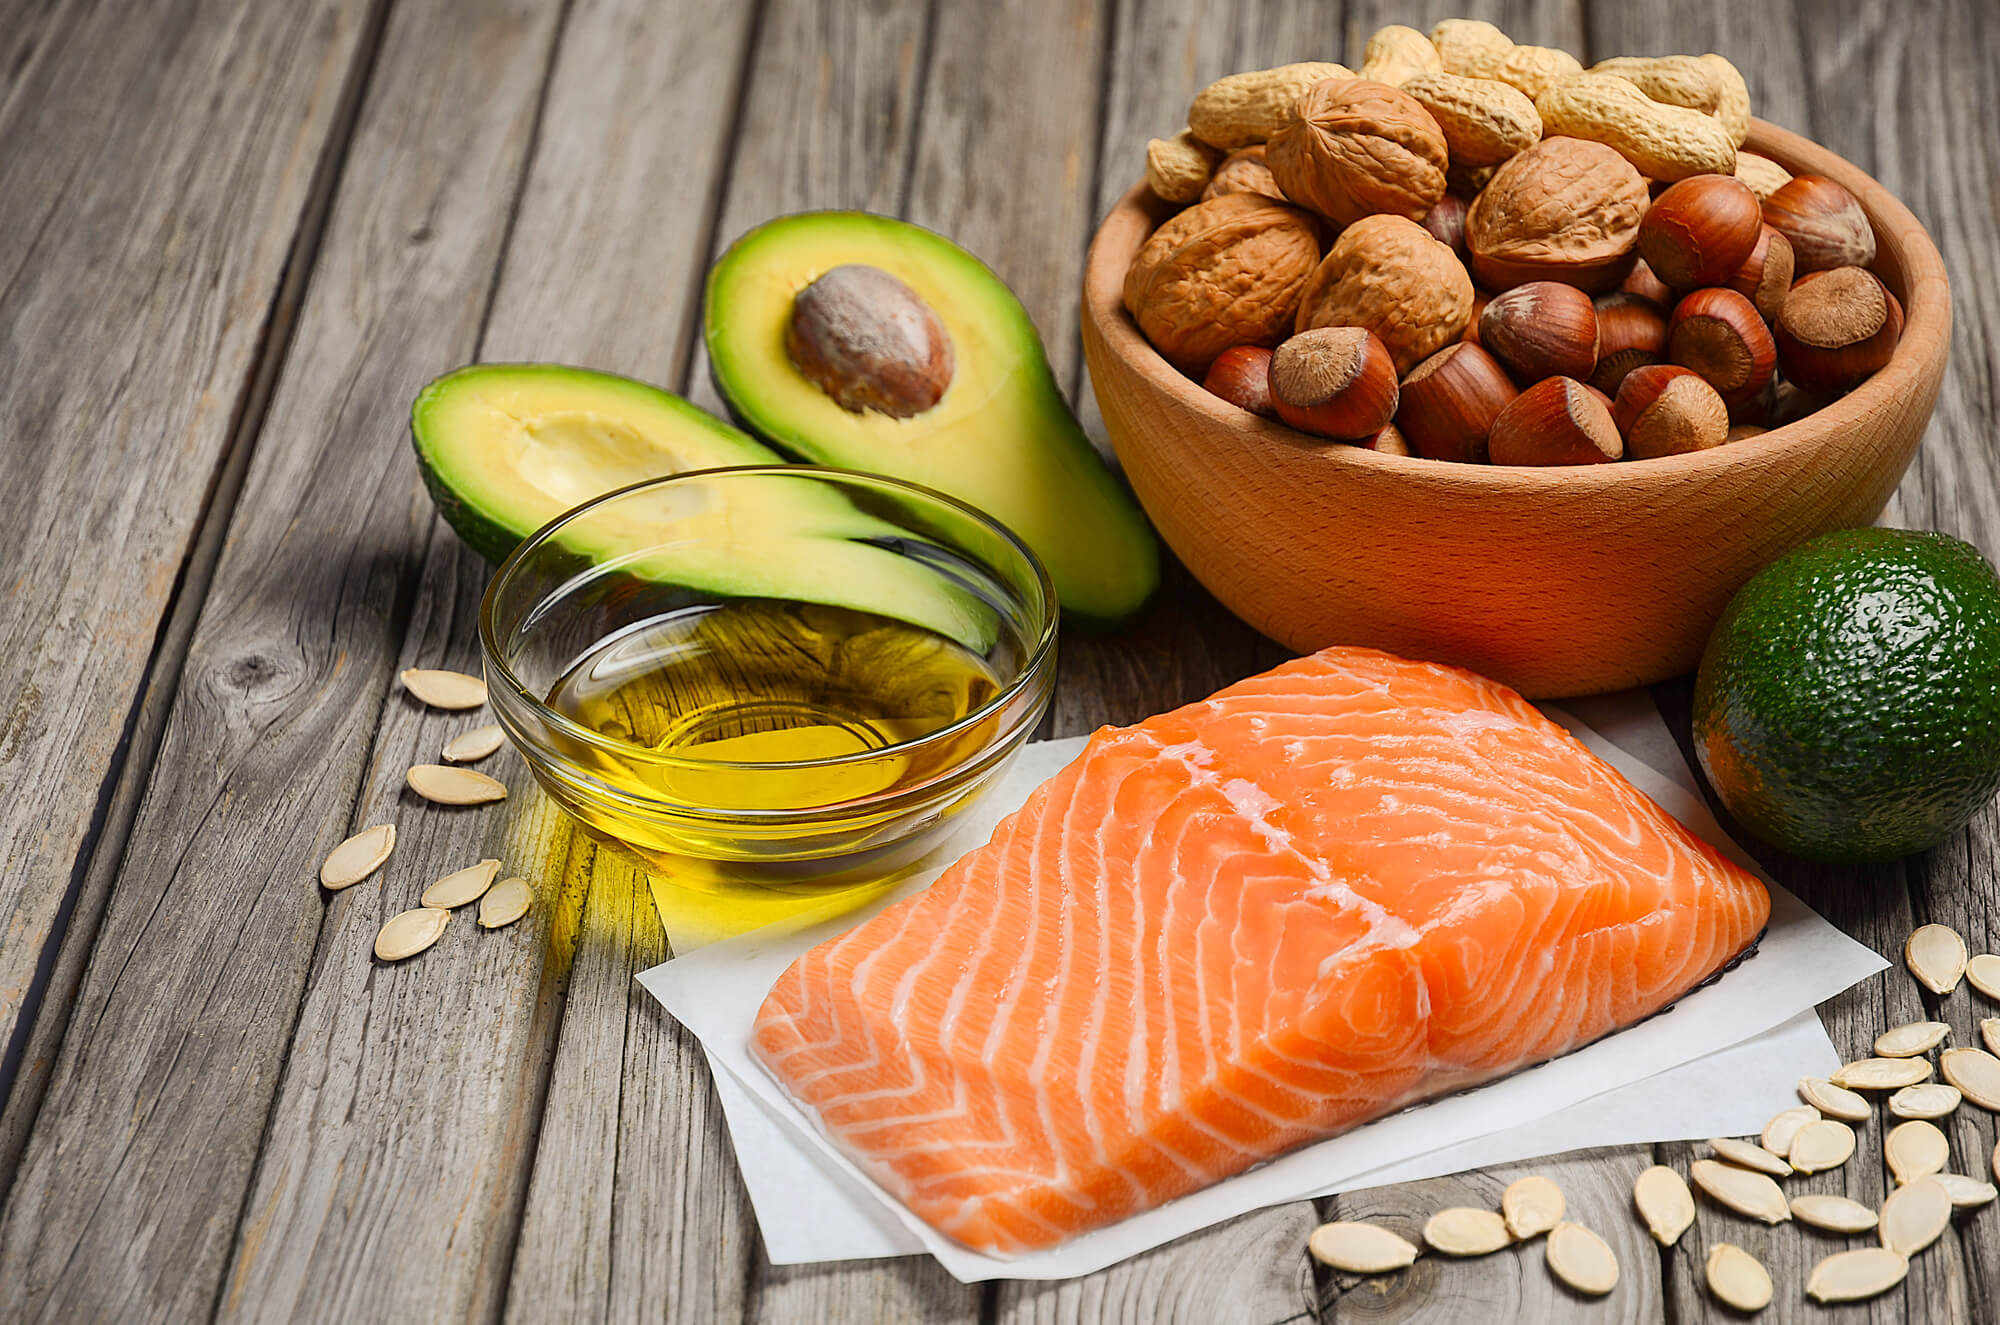 The Low-Fat Diet Myth